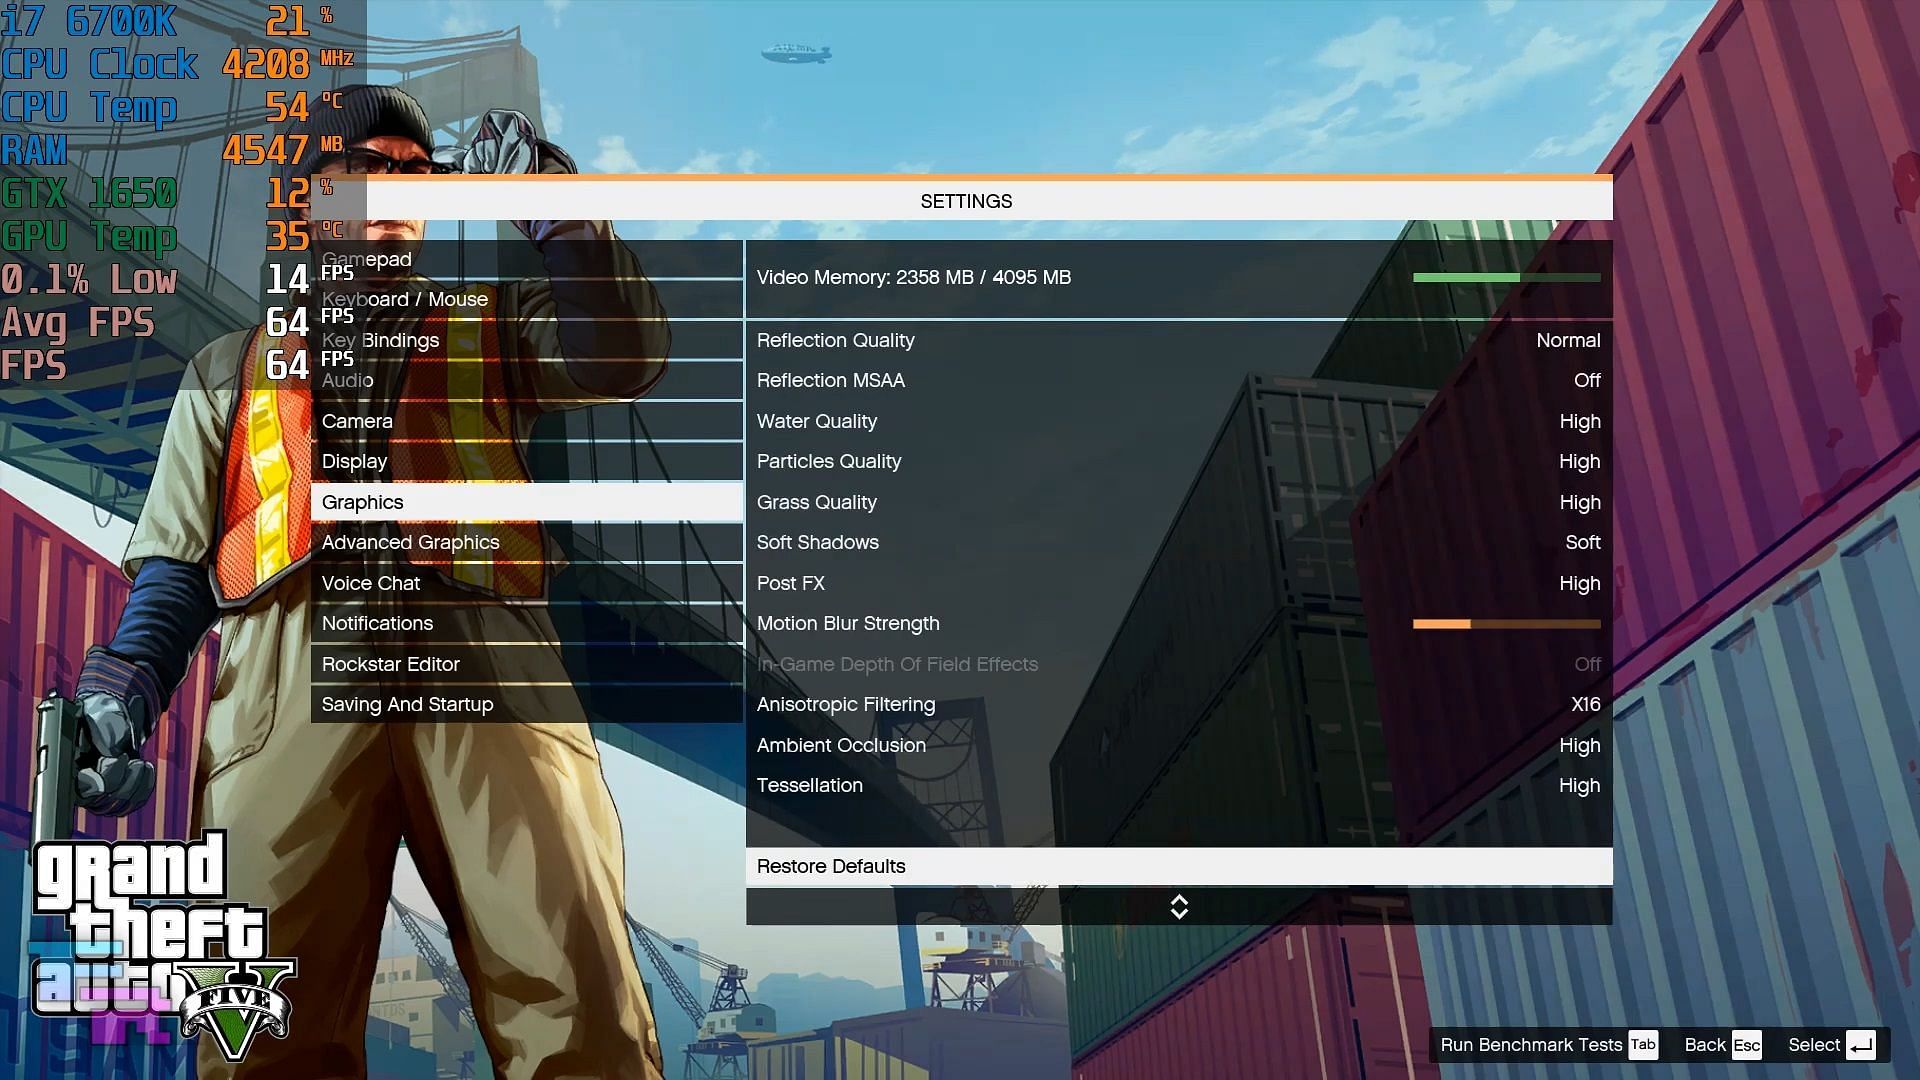 Graphics settings page 3 (Image via FrameRated, YouTube)